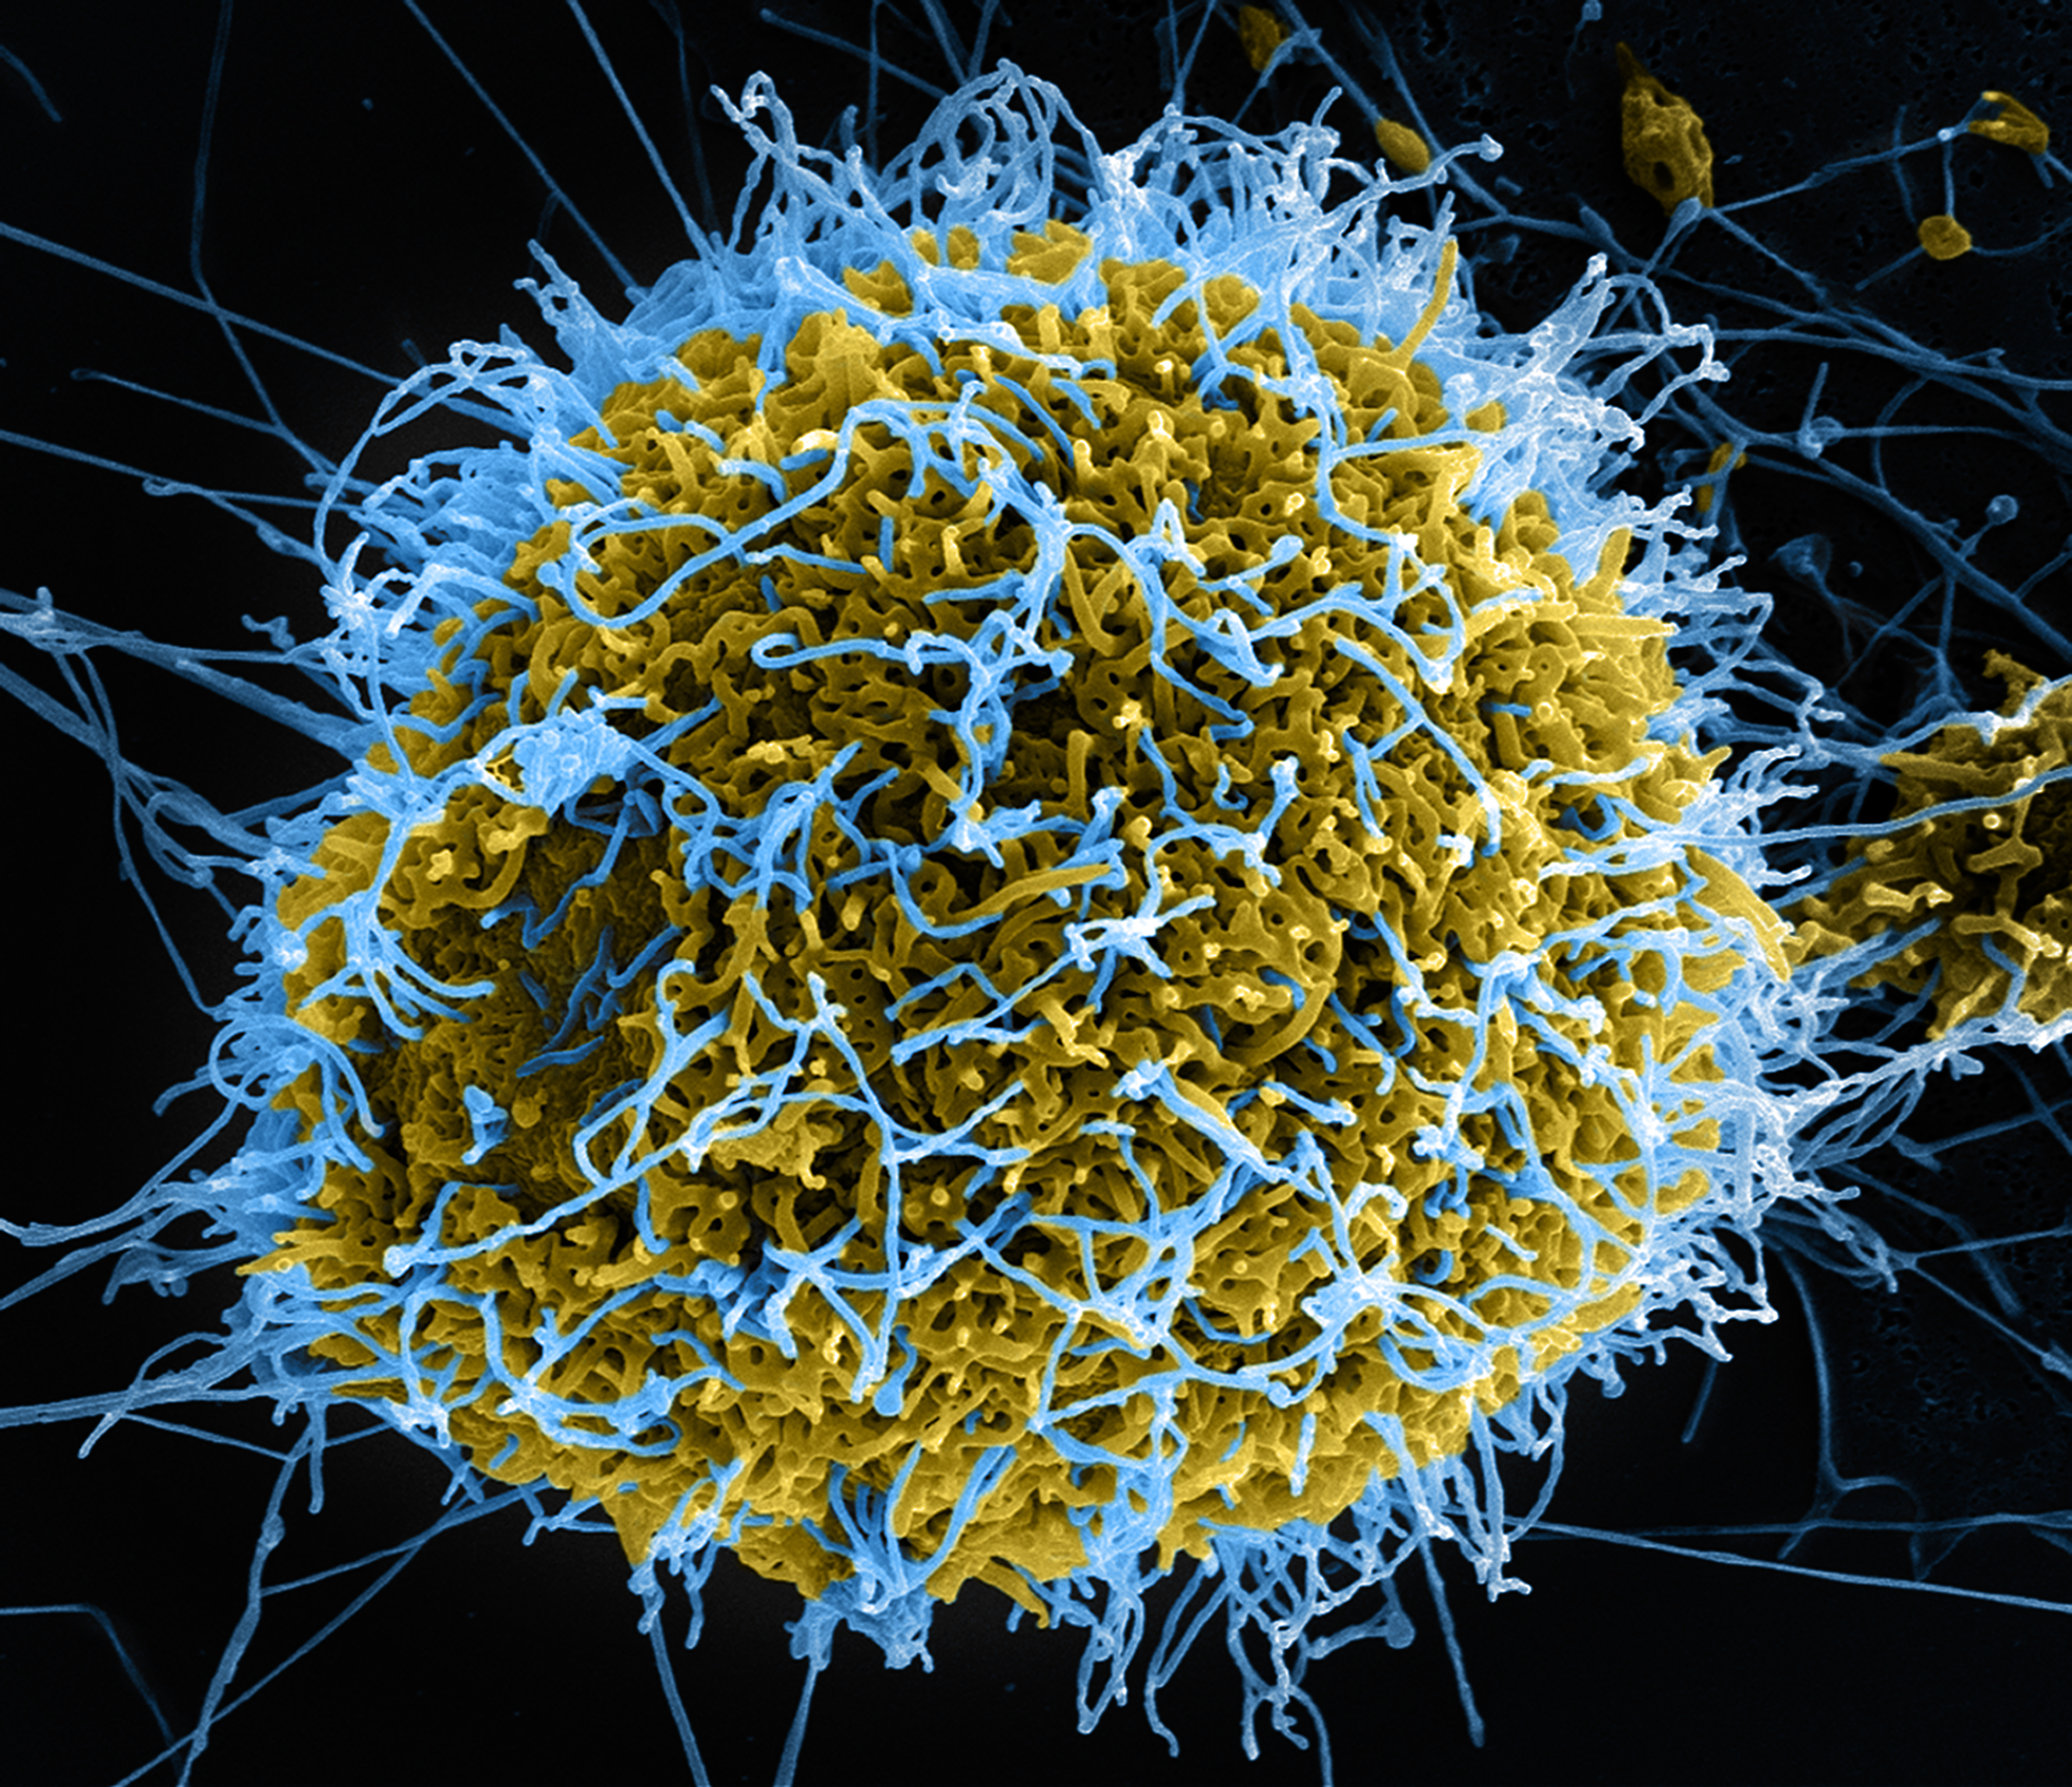 Colorized scanning electron micrograph of filamentous Ebola virus particles (blue) budding from a chronically infected VERO E6 cell (yellow-green). Credit: National Institute of Allergy and Infectious Diseases, National Institutes of Health